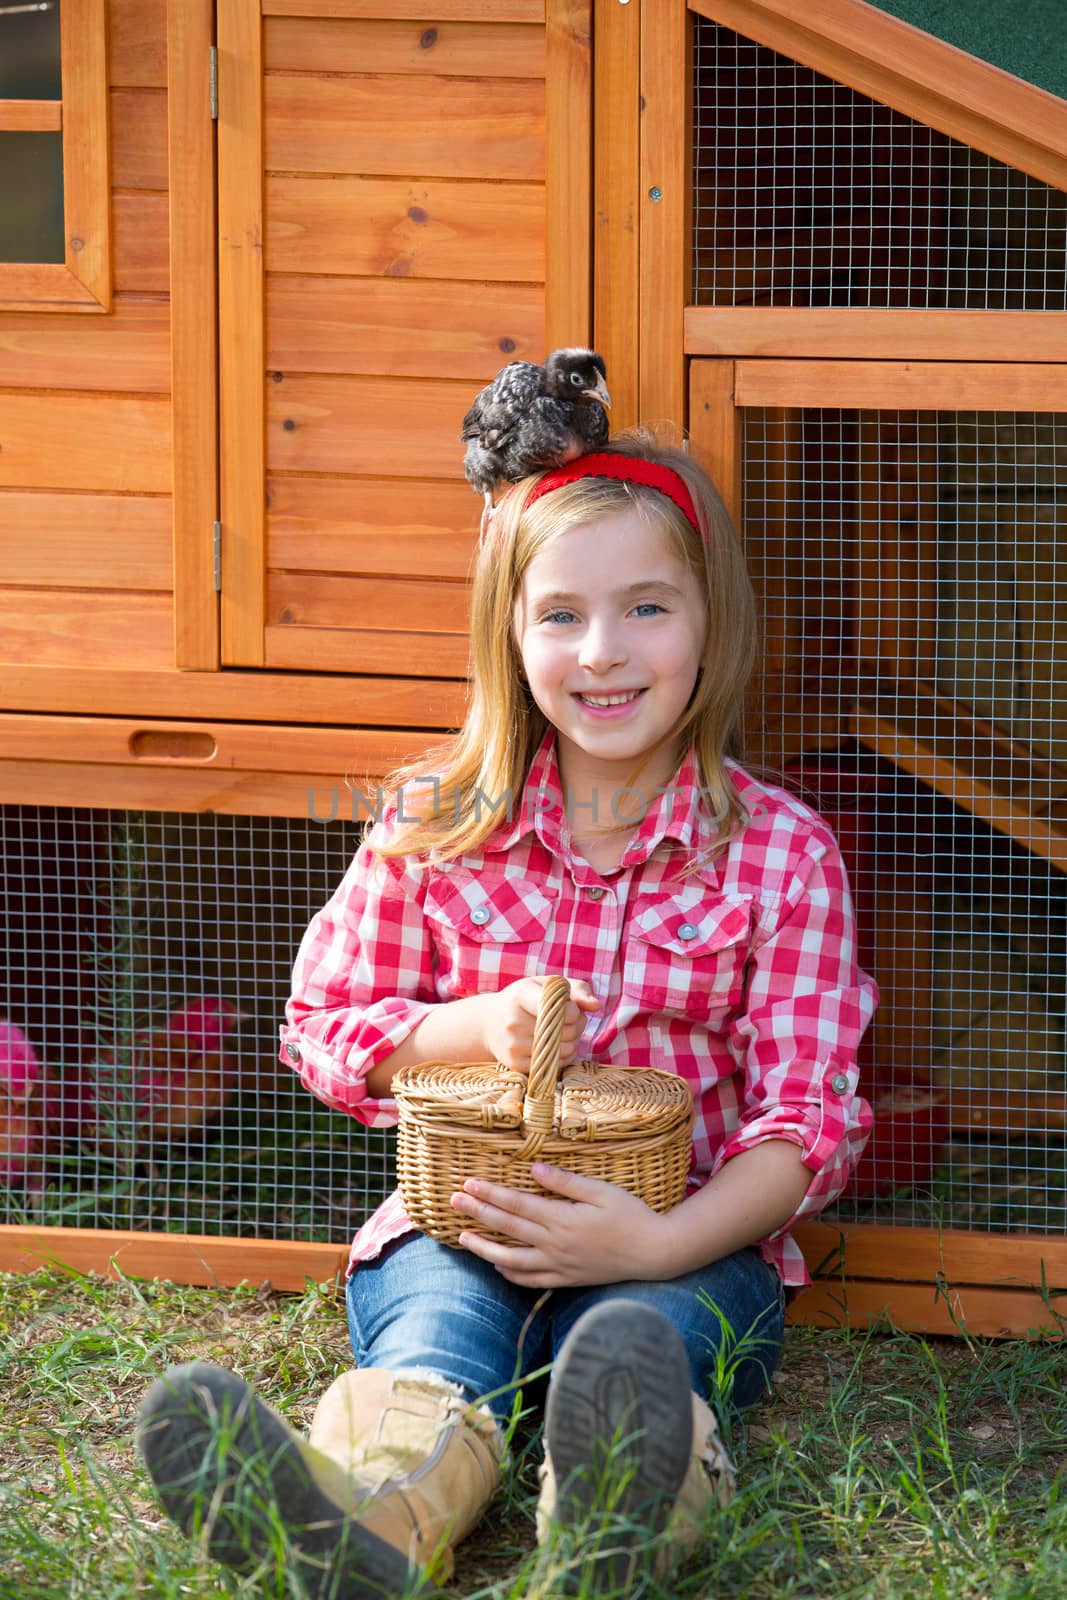 breeder hens kid girl rancher blond farmer playing with chicks in chicken tractor coop